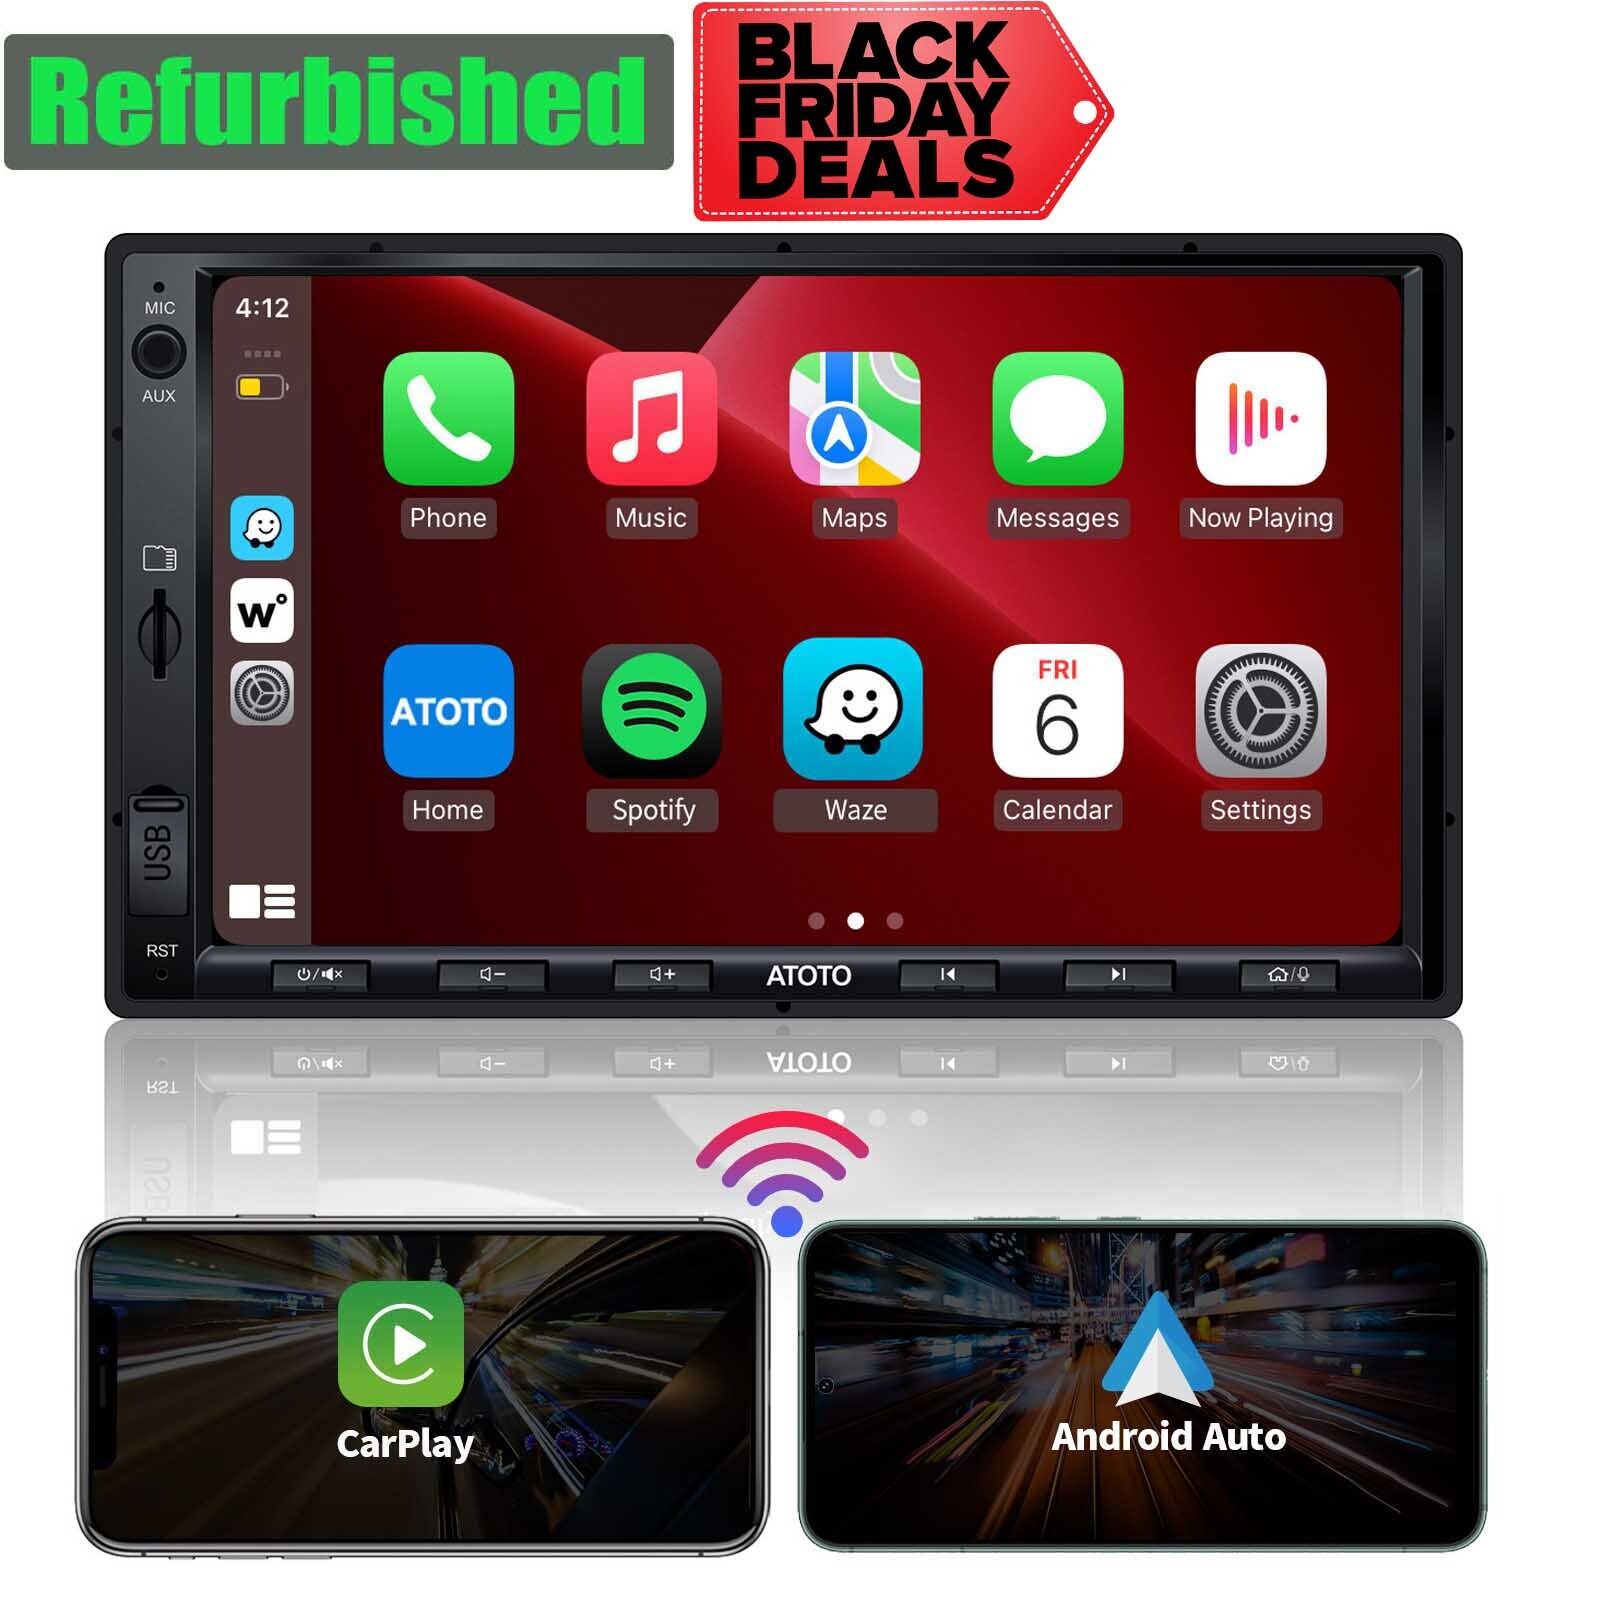 ATOTO F7WE 7IN Double DIN Car Stere Wireless Android Auto & CarPlay Bluetooth FM